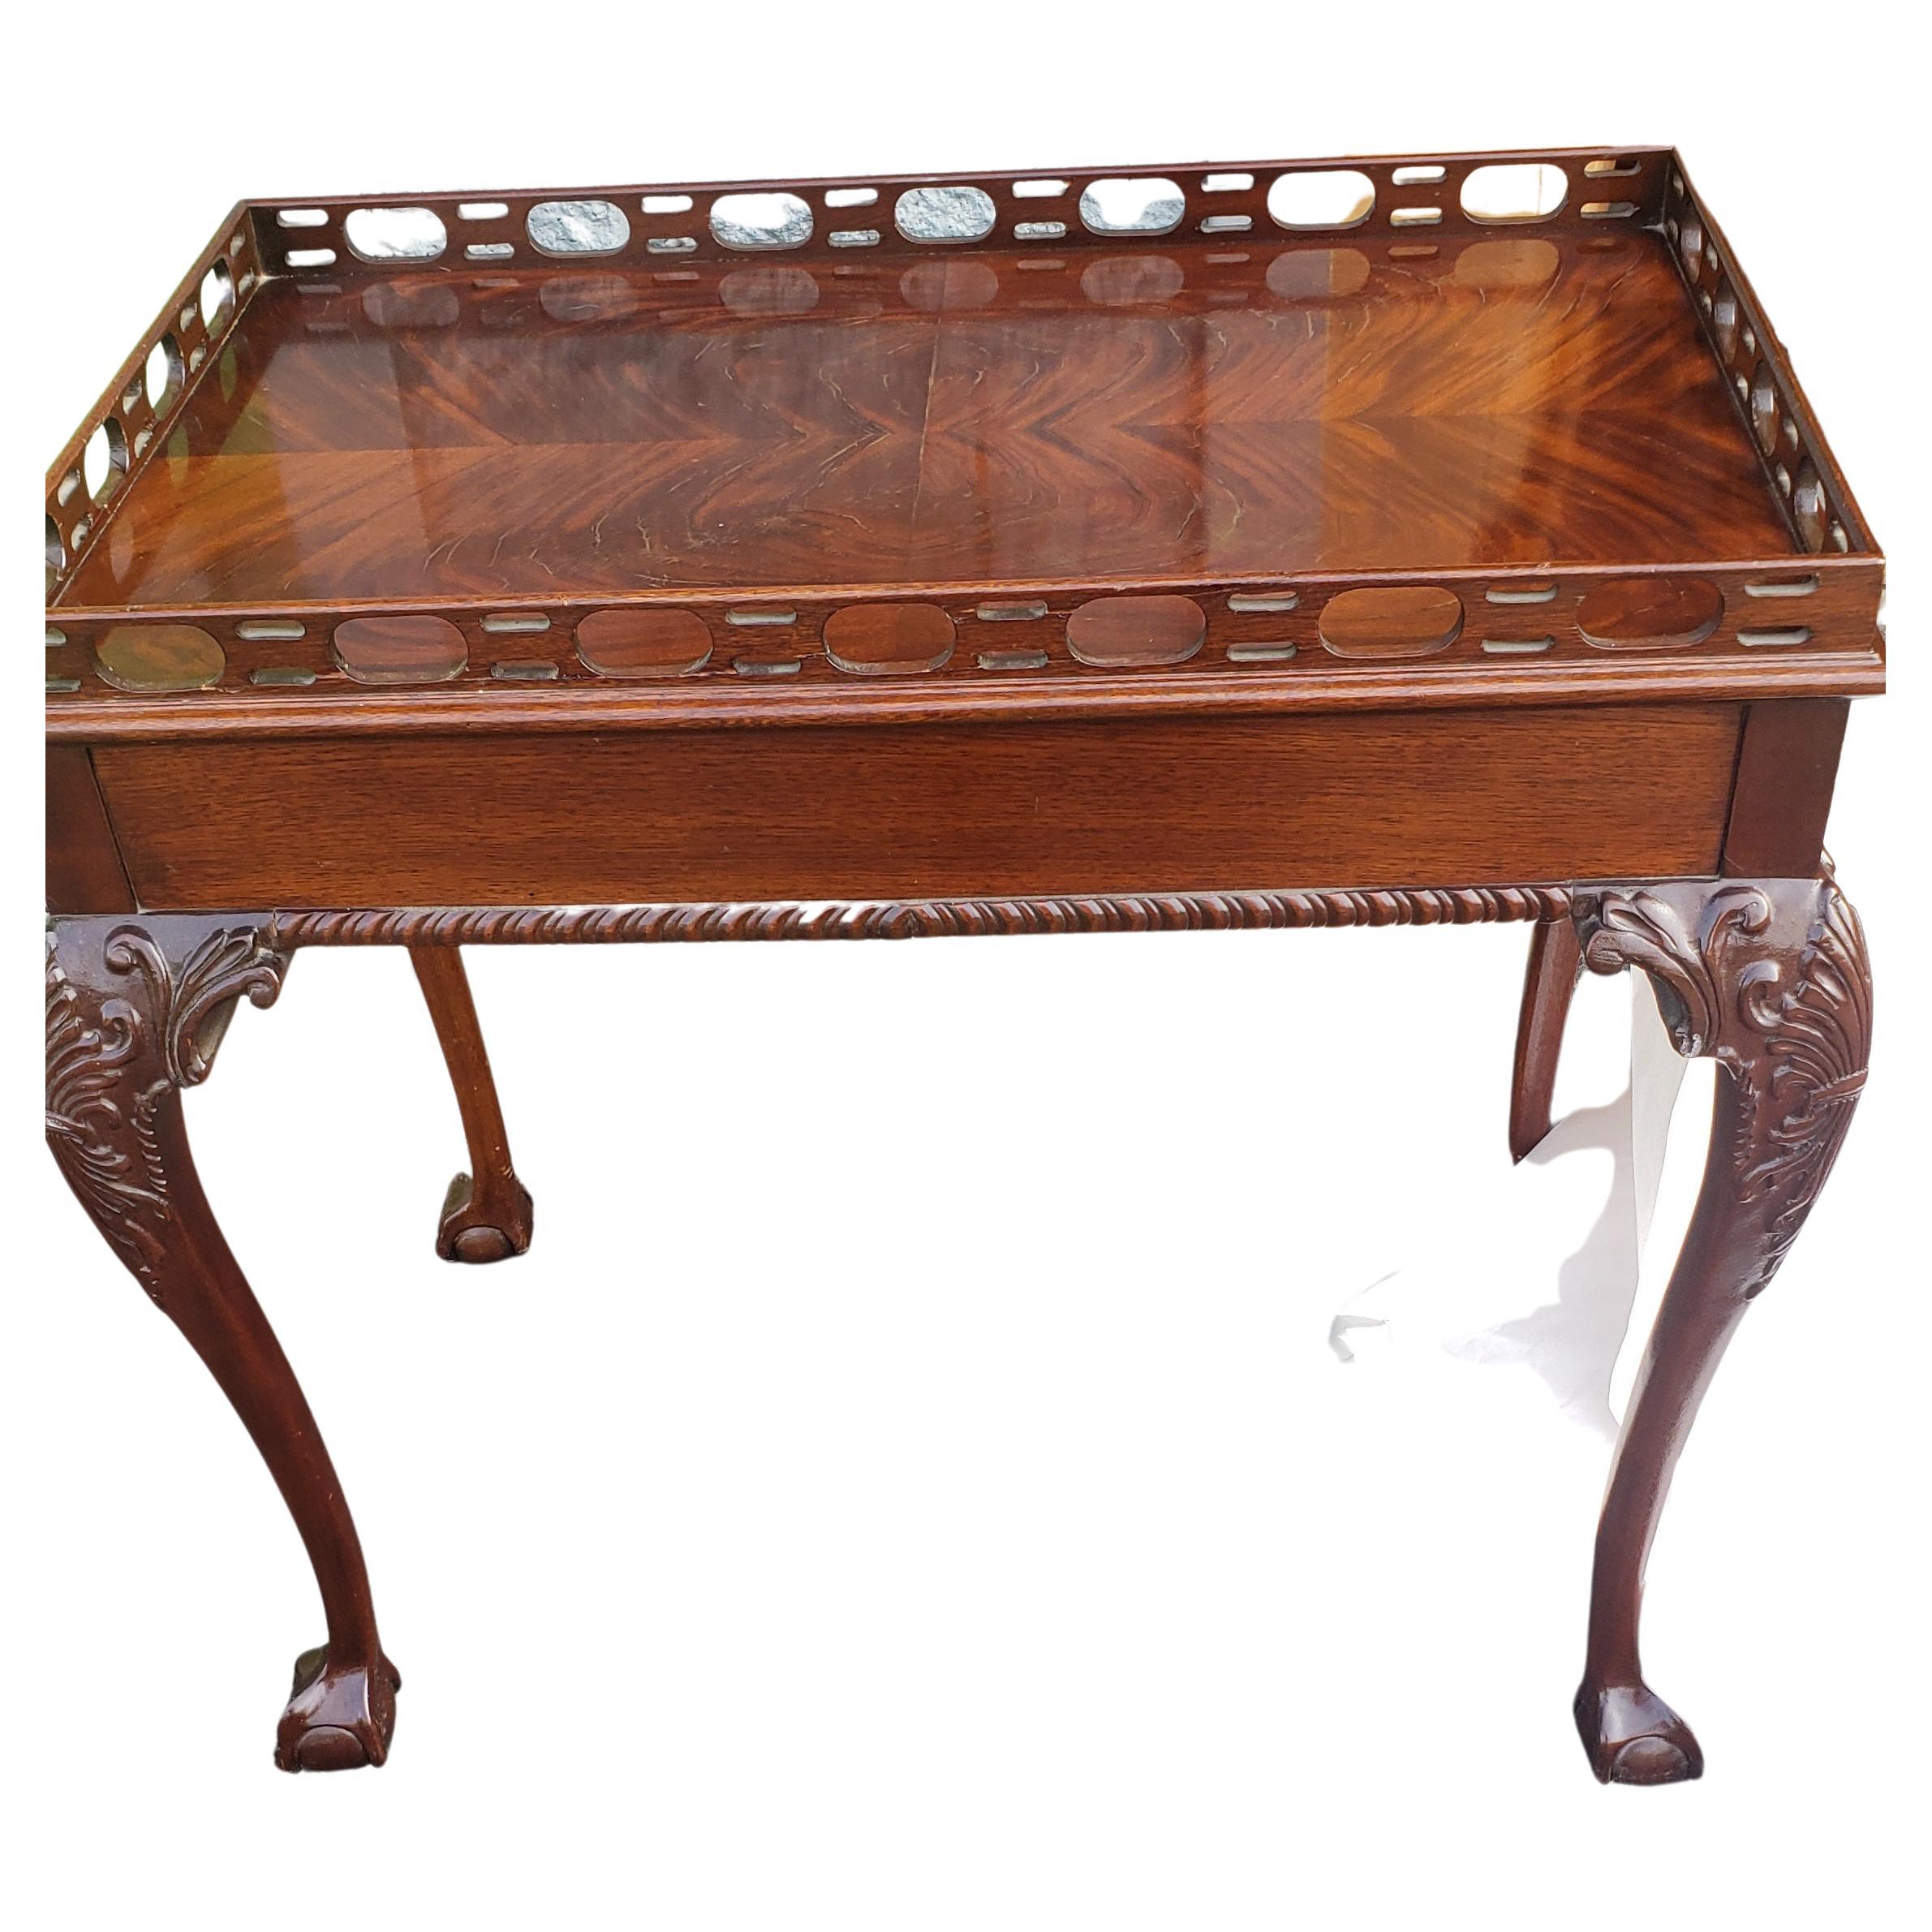 Chippendale Flame Mahogany tea table with Pierced Gallery, carved cabriole legs terminating with ball and claw feet. Attributed to Councill Craftmen Furniture. Good vintage condition and measures 31